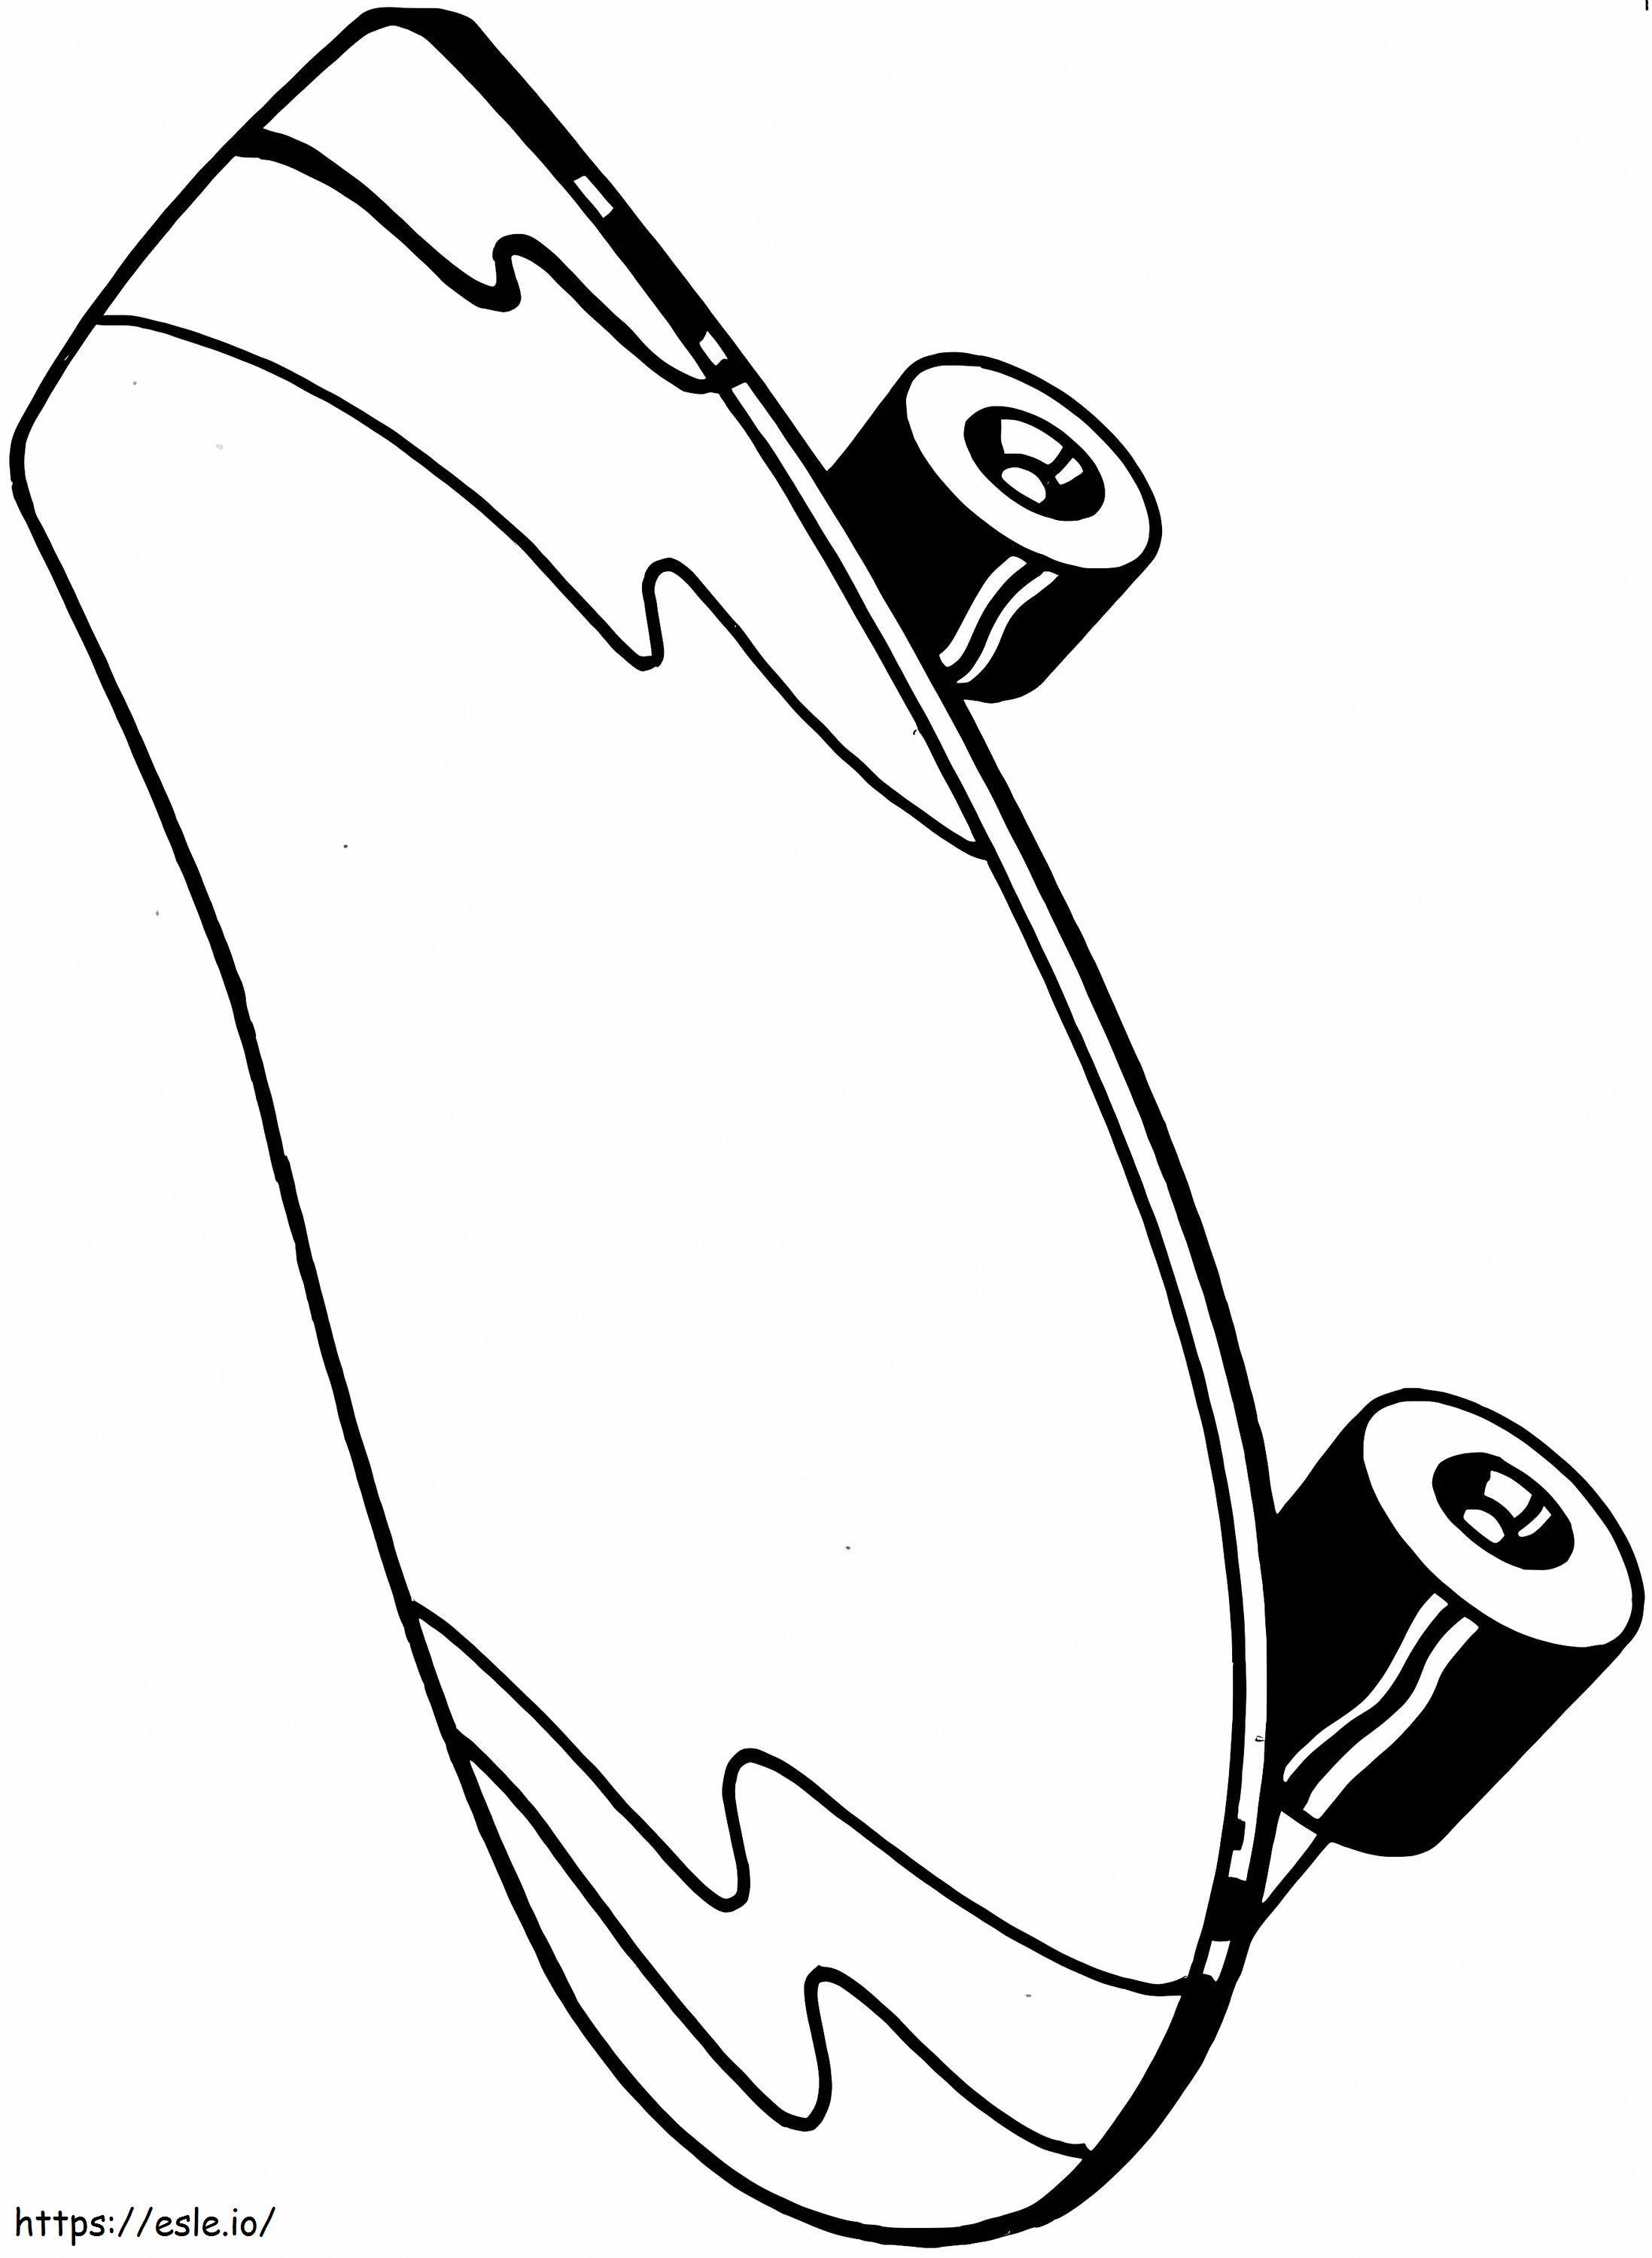 A Skateboard coloring page